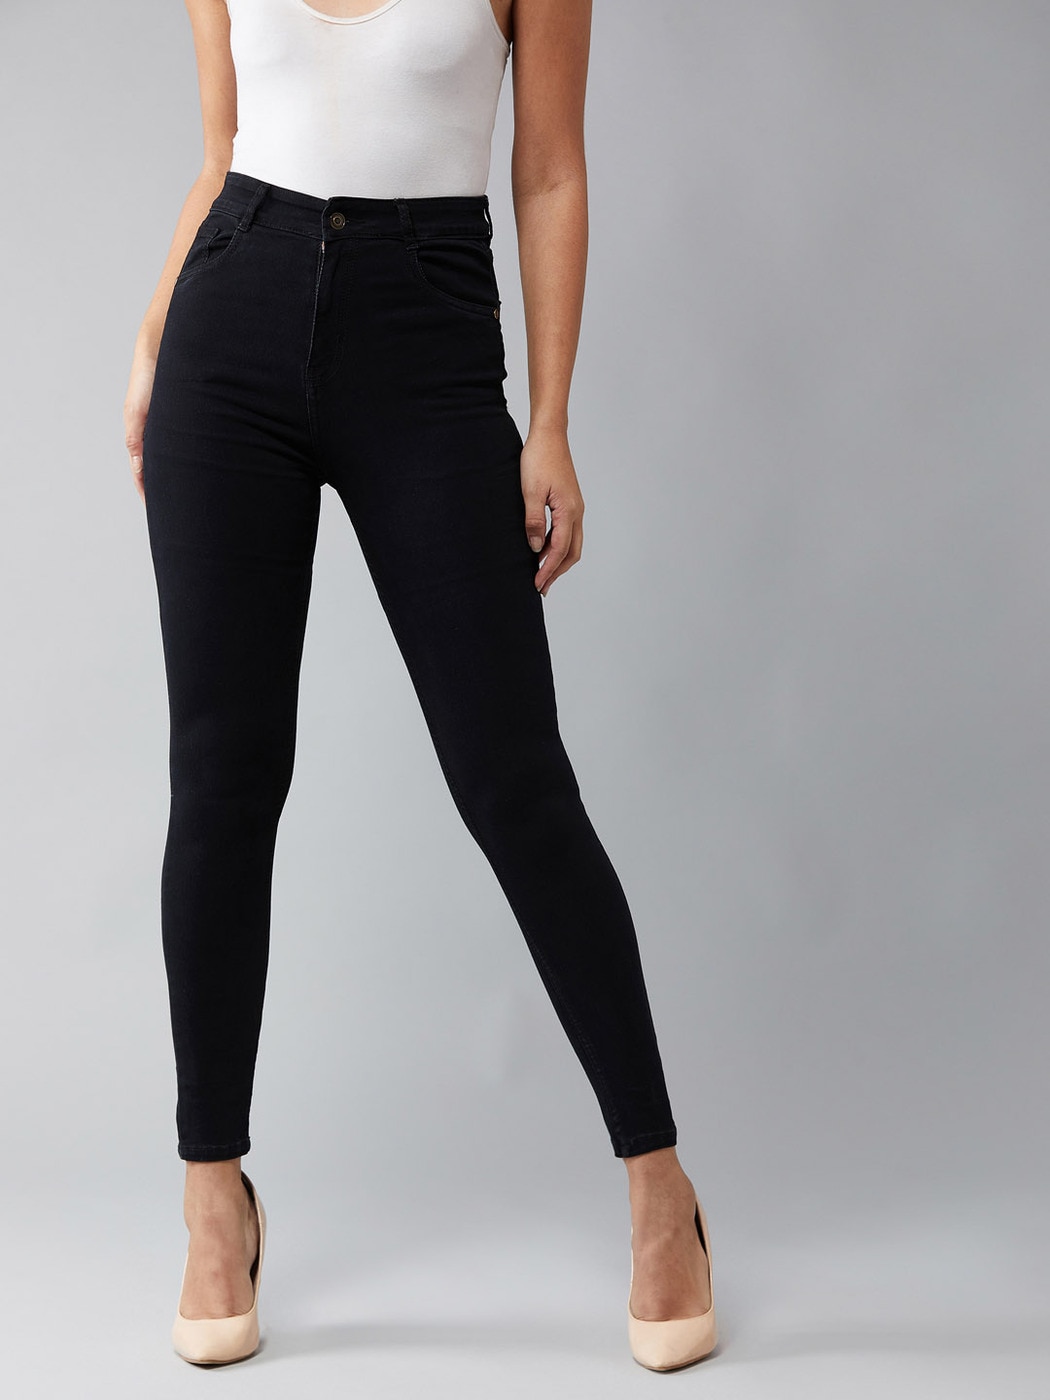 Buy Black Jeans & Jeggings for Women by Dolce Crudo | Ajio.com